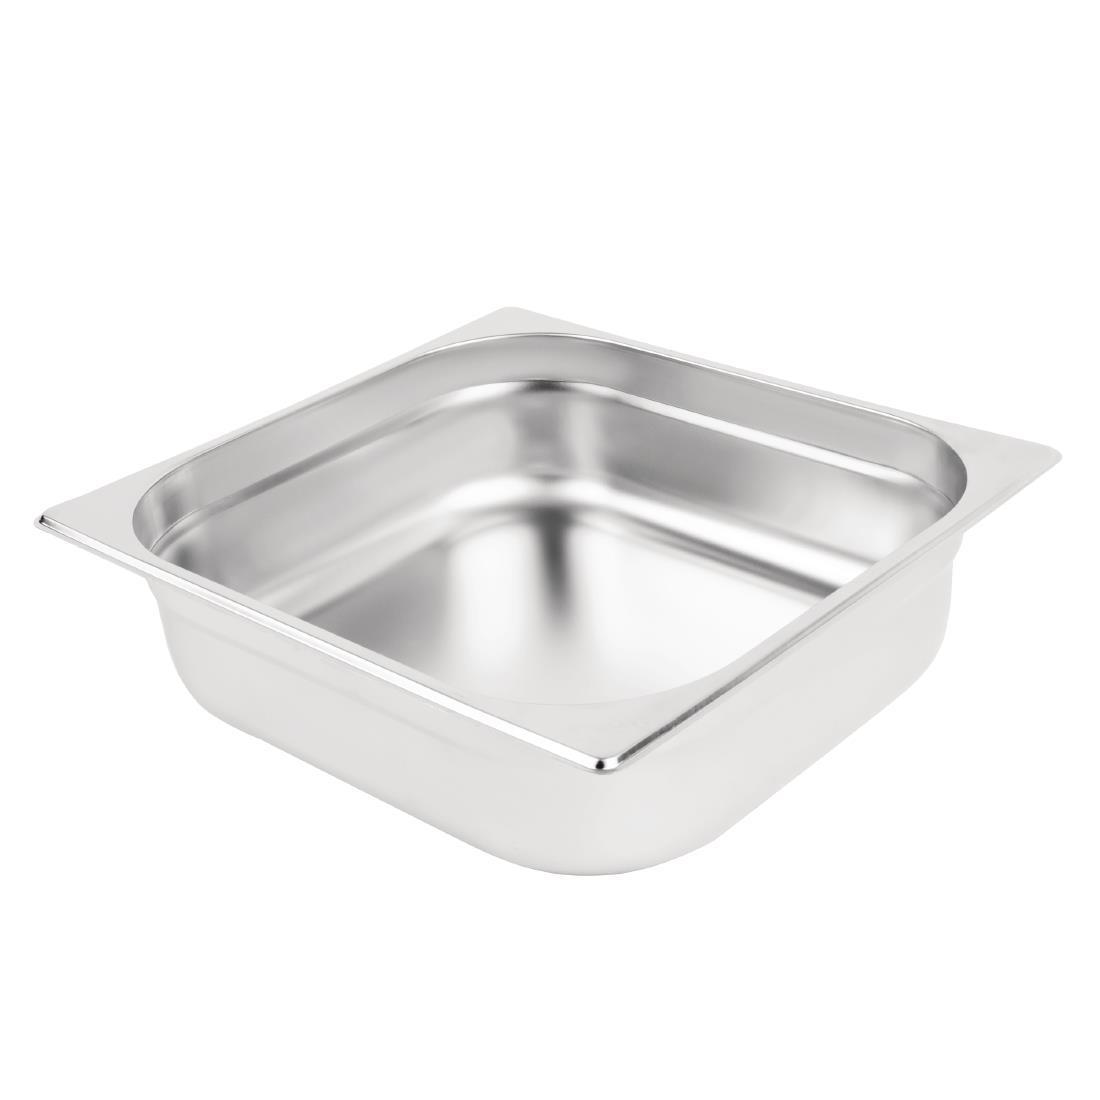 Vogue Stainless Steel 2/3 Gastronorm Pan 100mm - K812  - 2